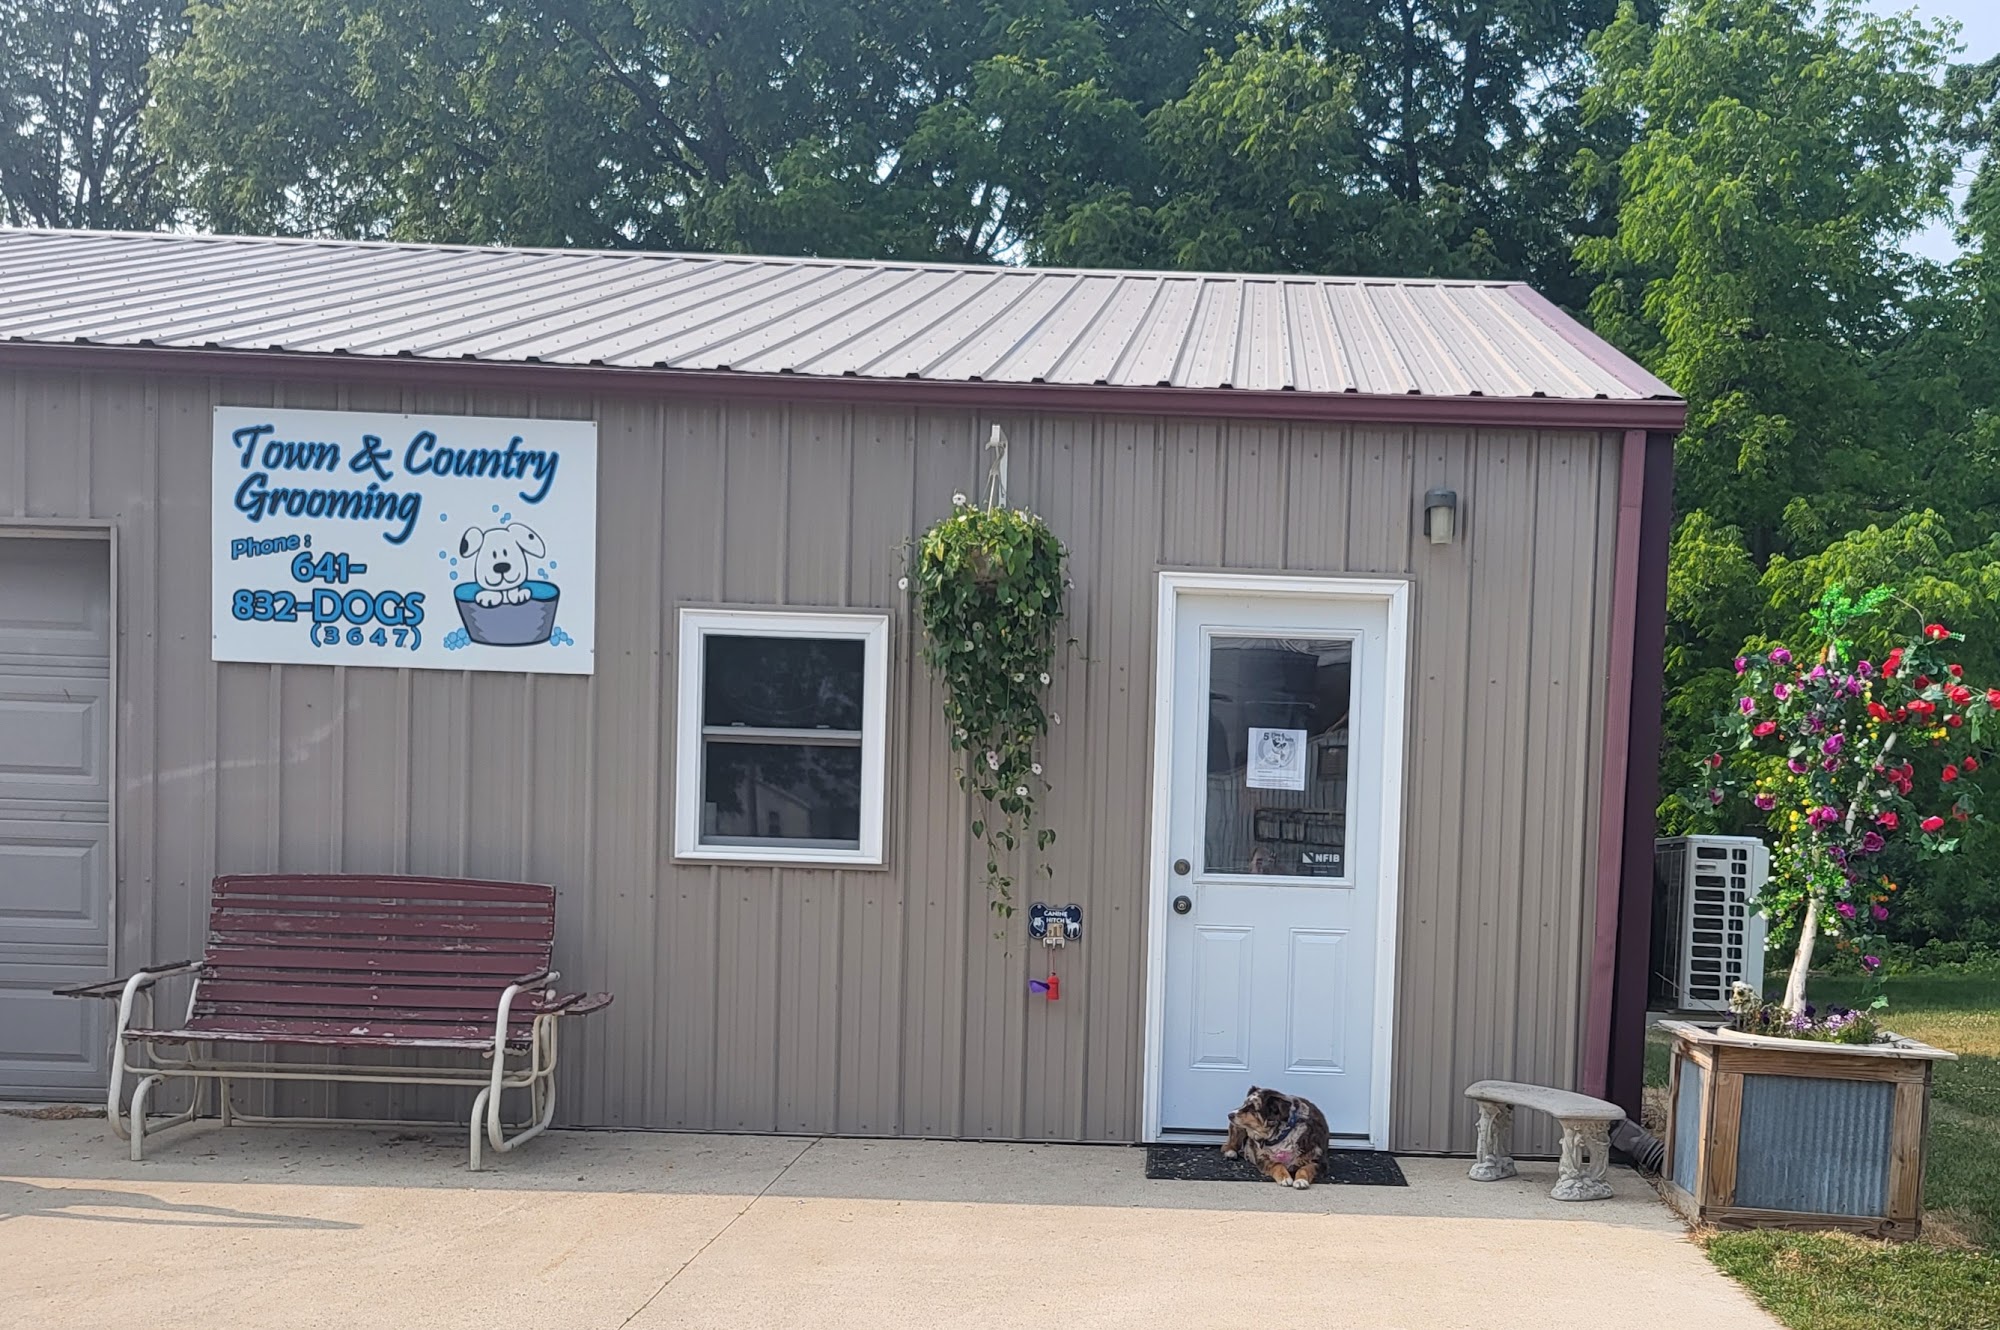 Town & Country Grooming 203 Main St, Orchard Iowa 50460